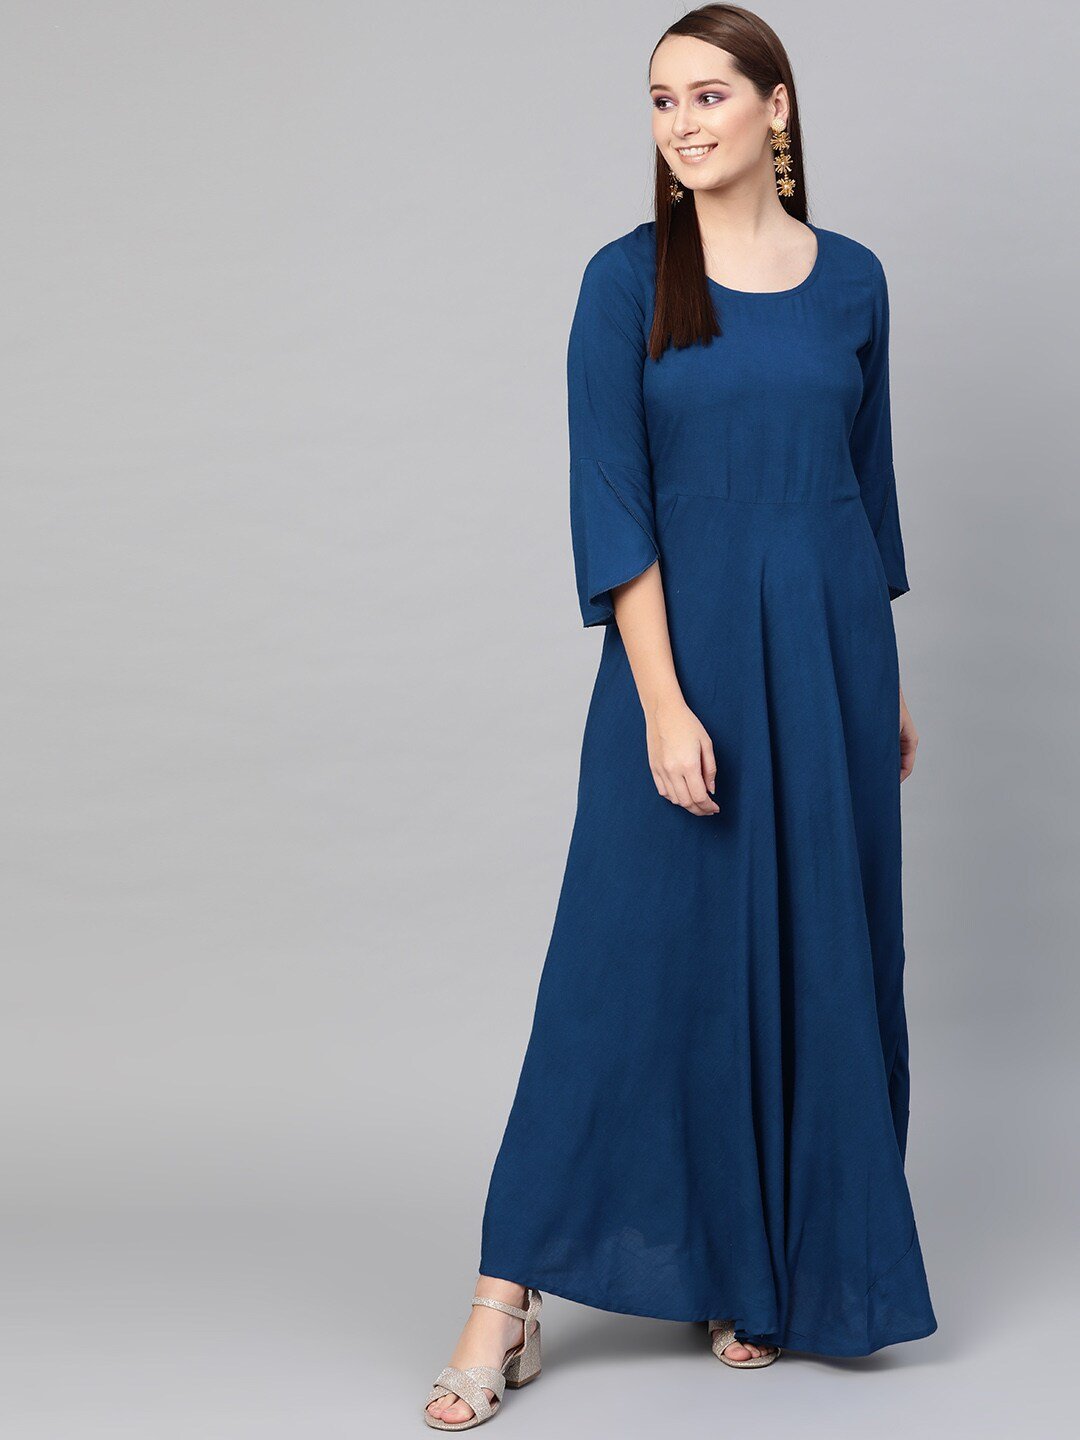 Women's  Blue Solid Fit and Flare Dress - AKS